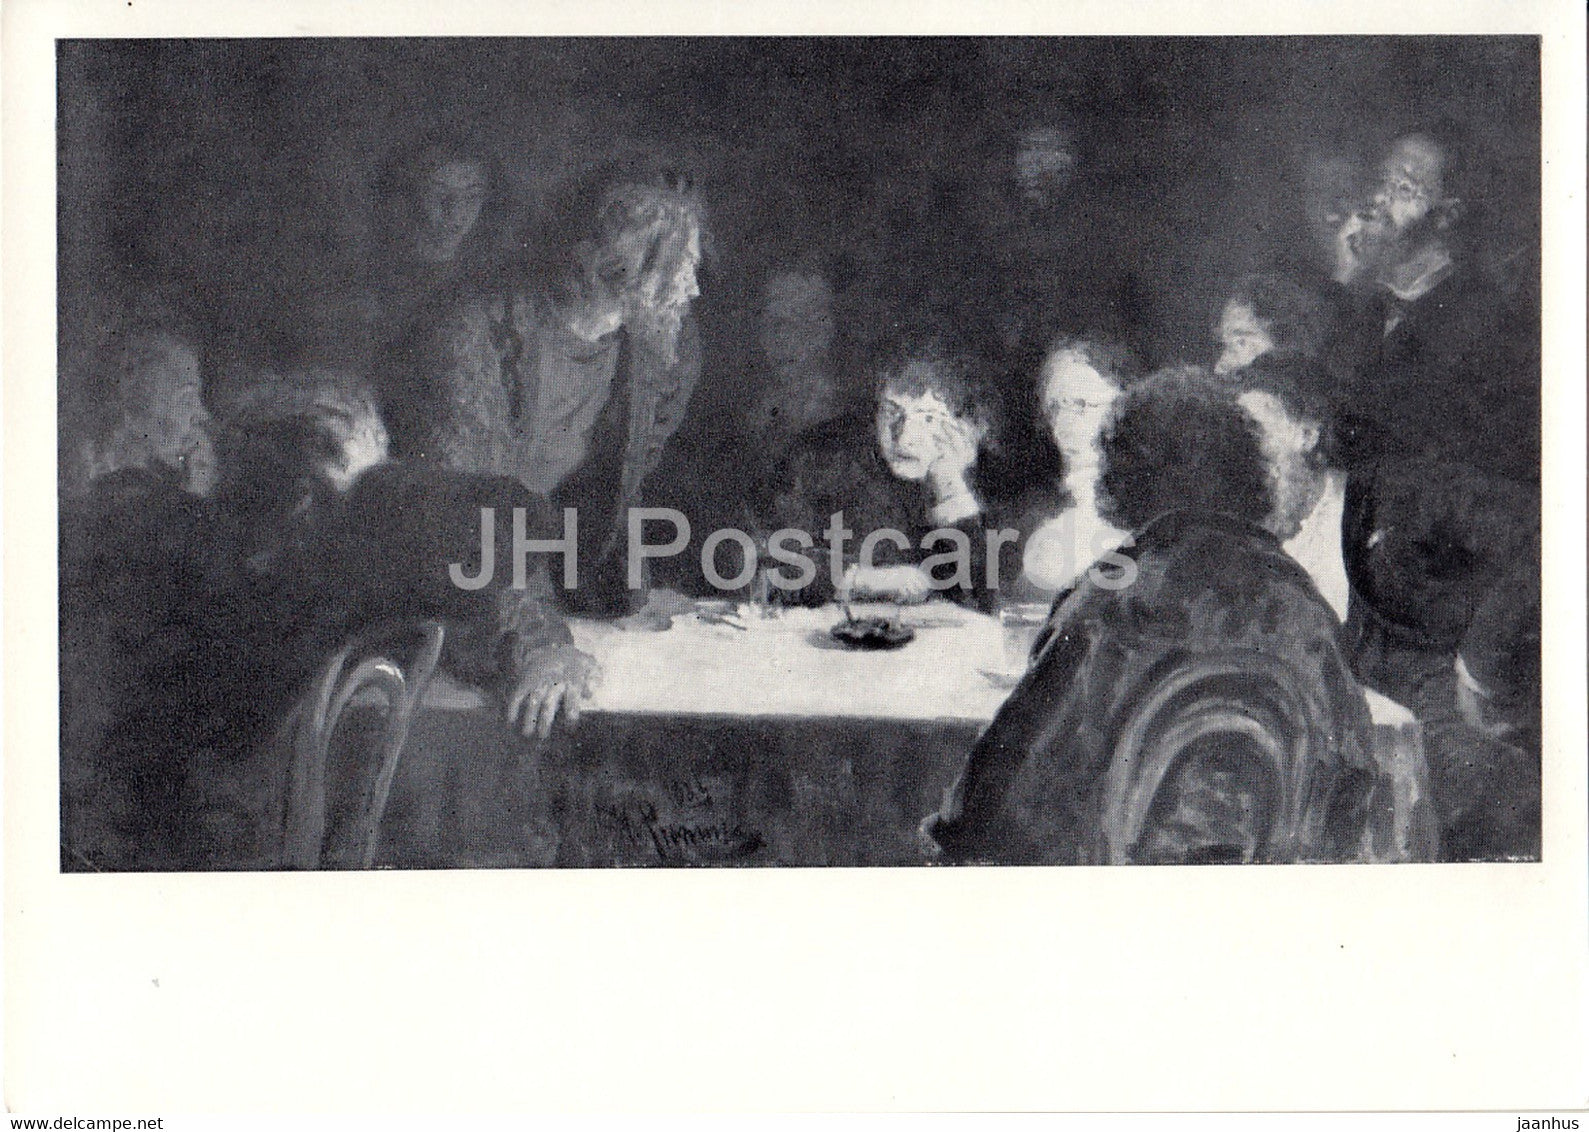 painting by I. Repin - Gathering - Russian art - 1970 - Russia USSR - unused - JH Postcards